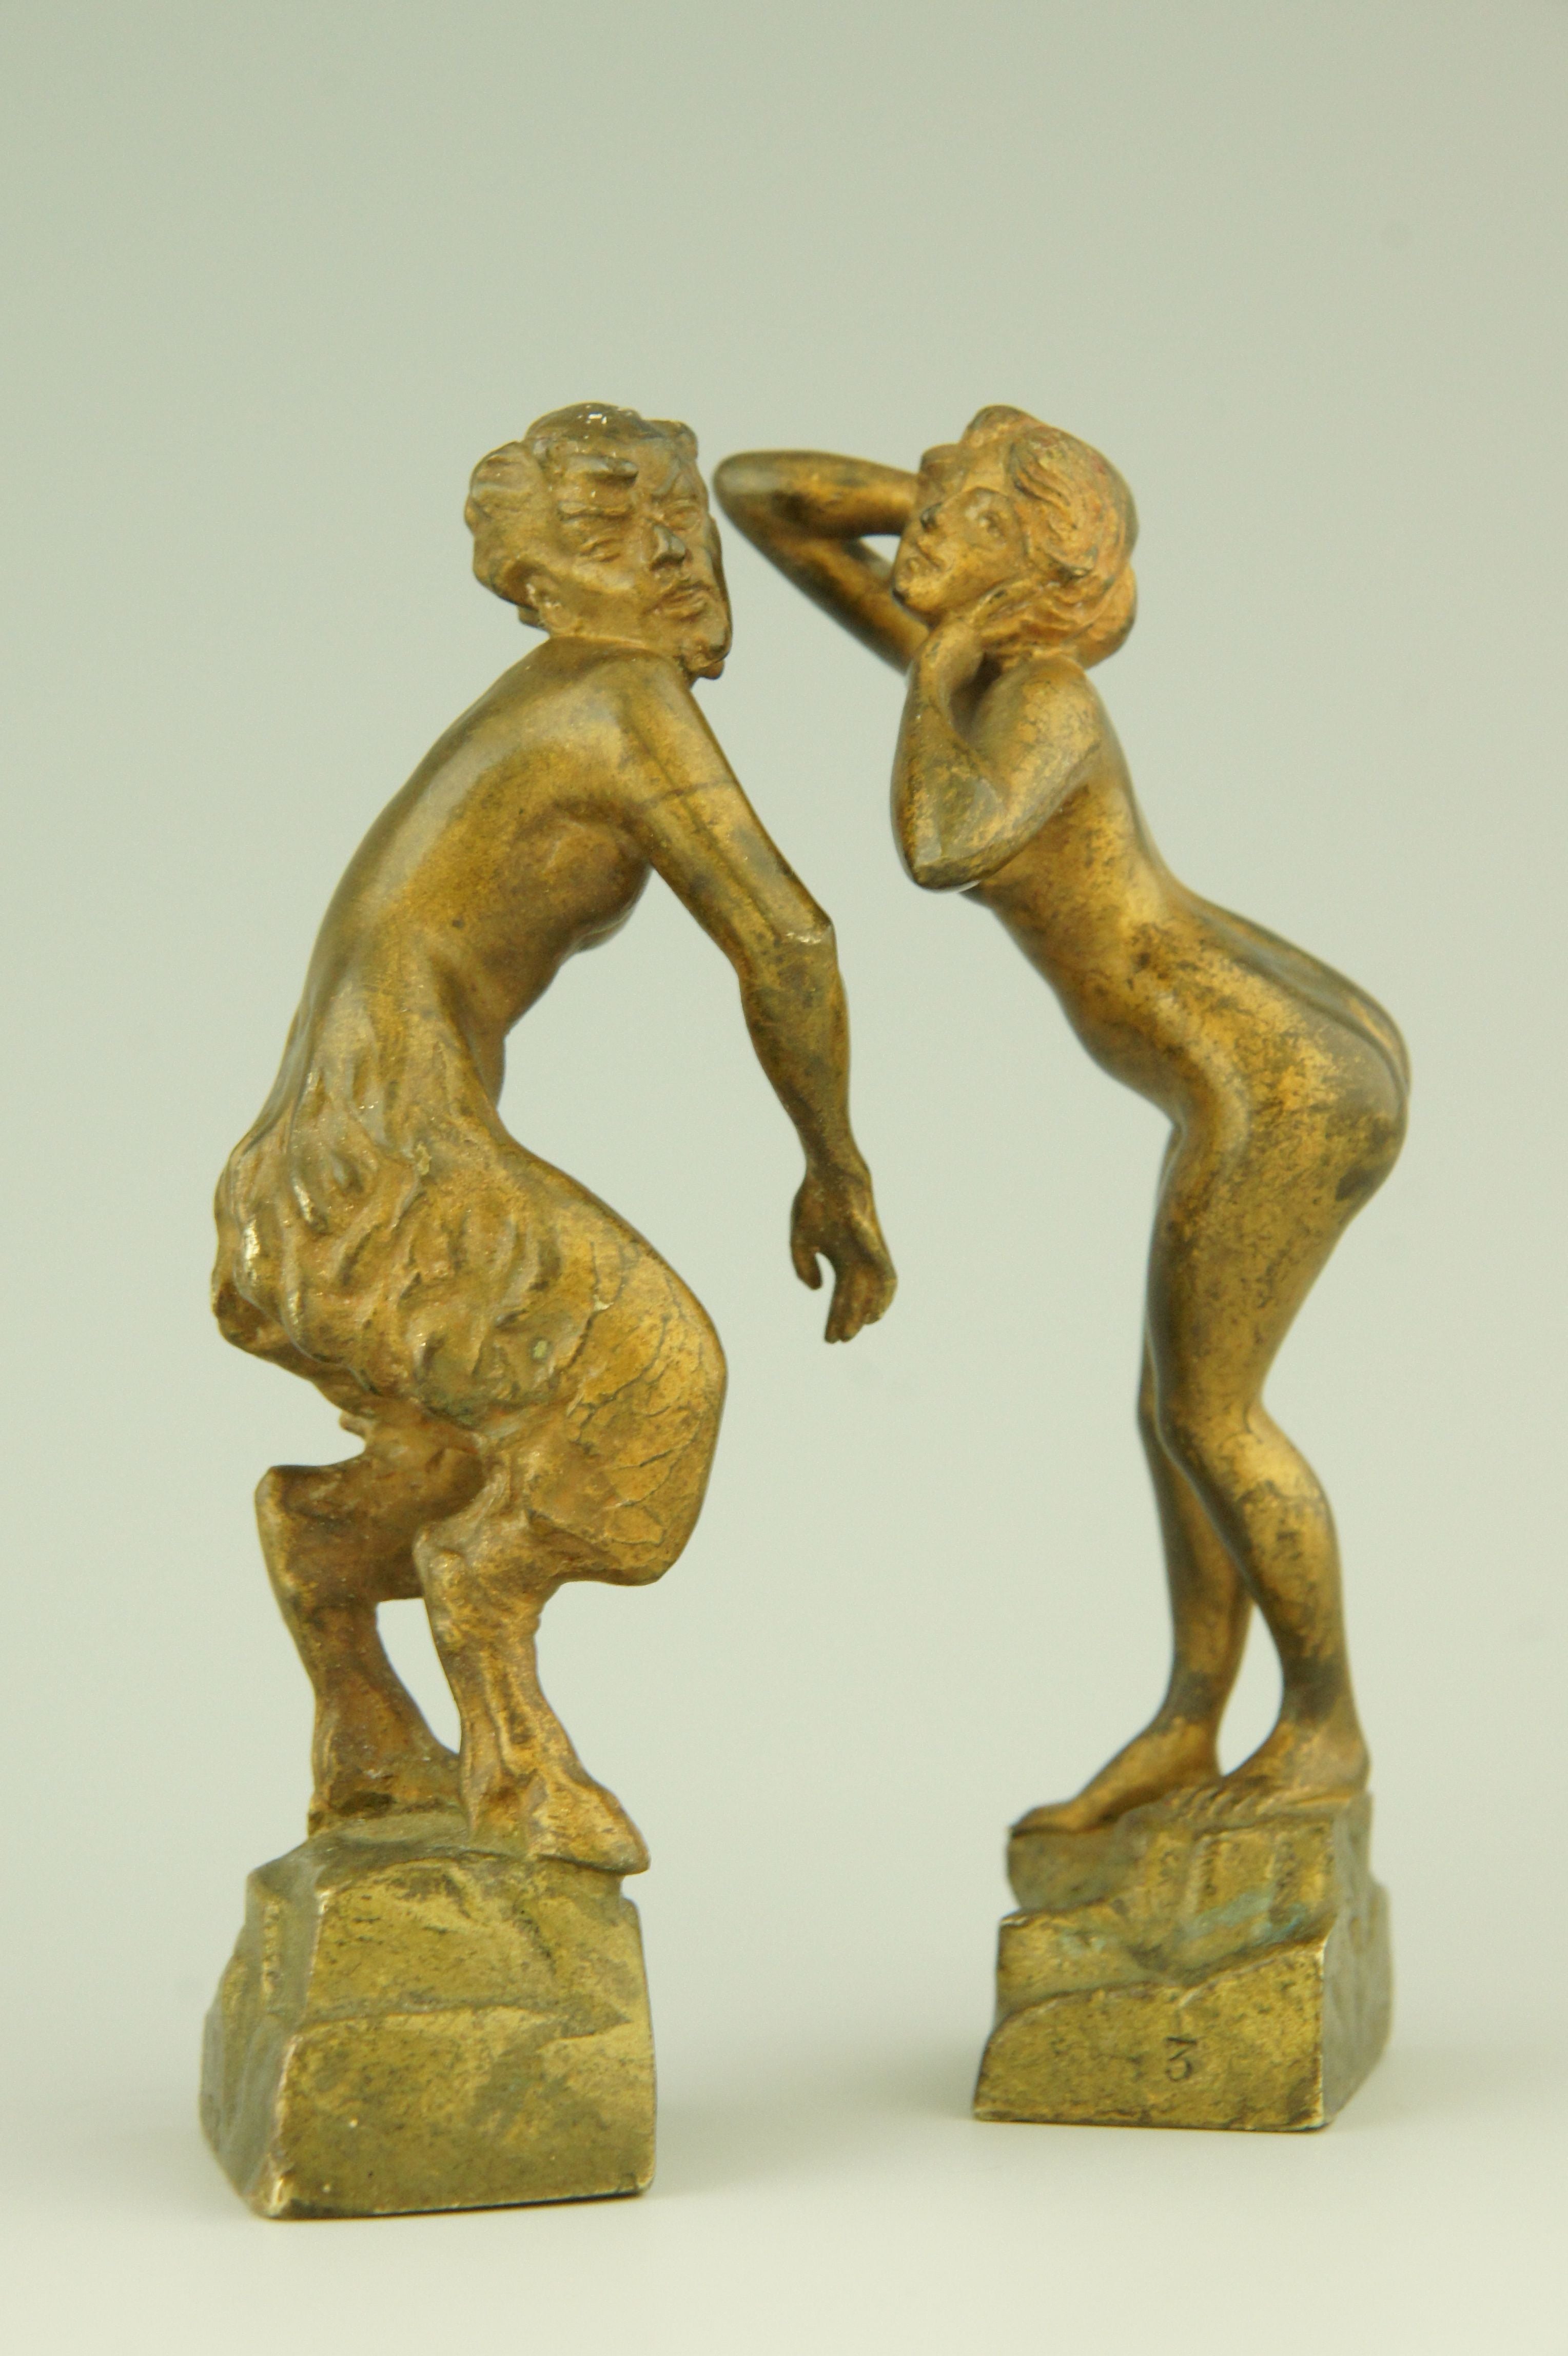 A pair of naughty Vienna bronzes of a nymph and a satyr.